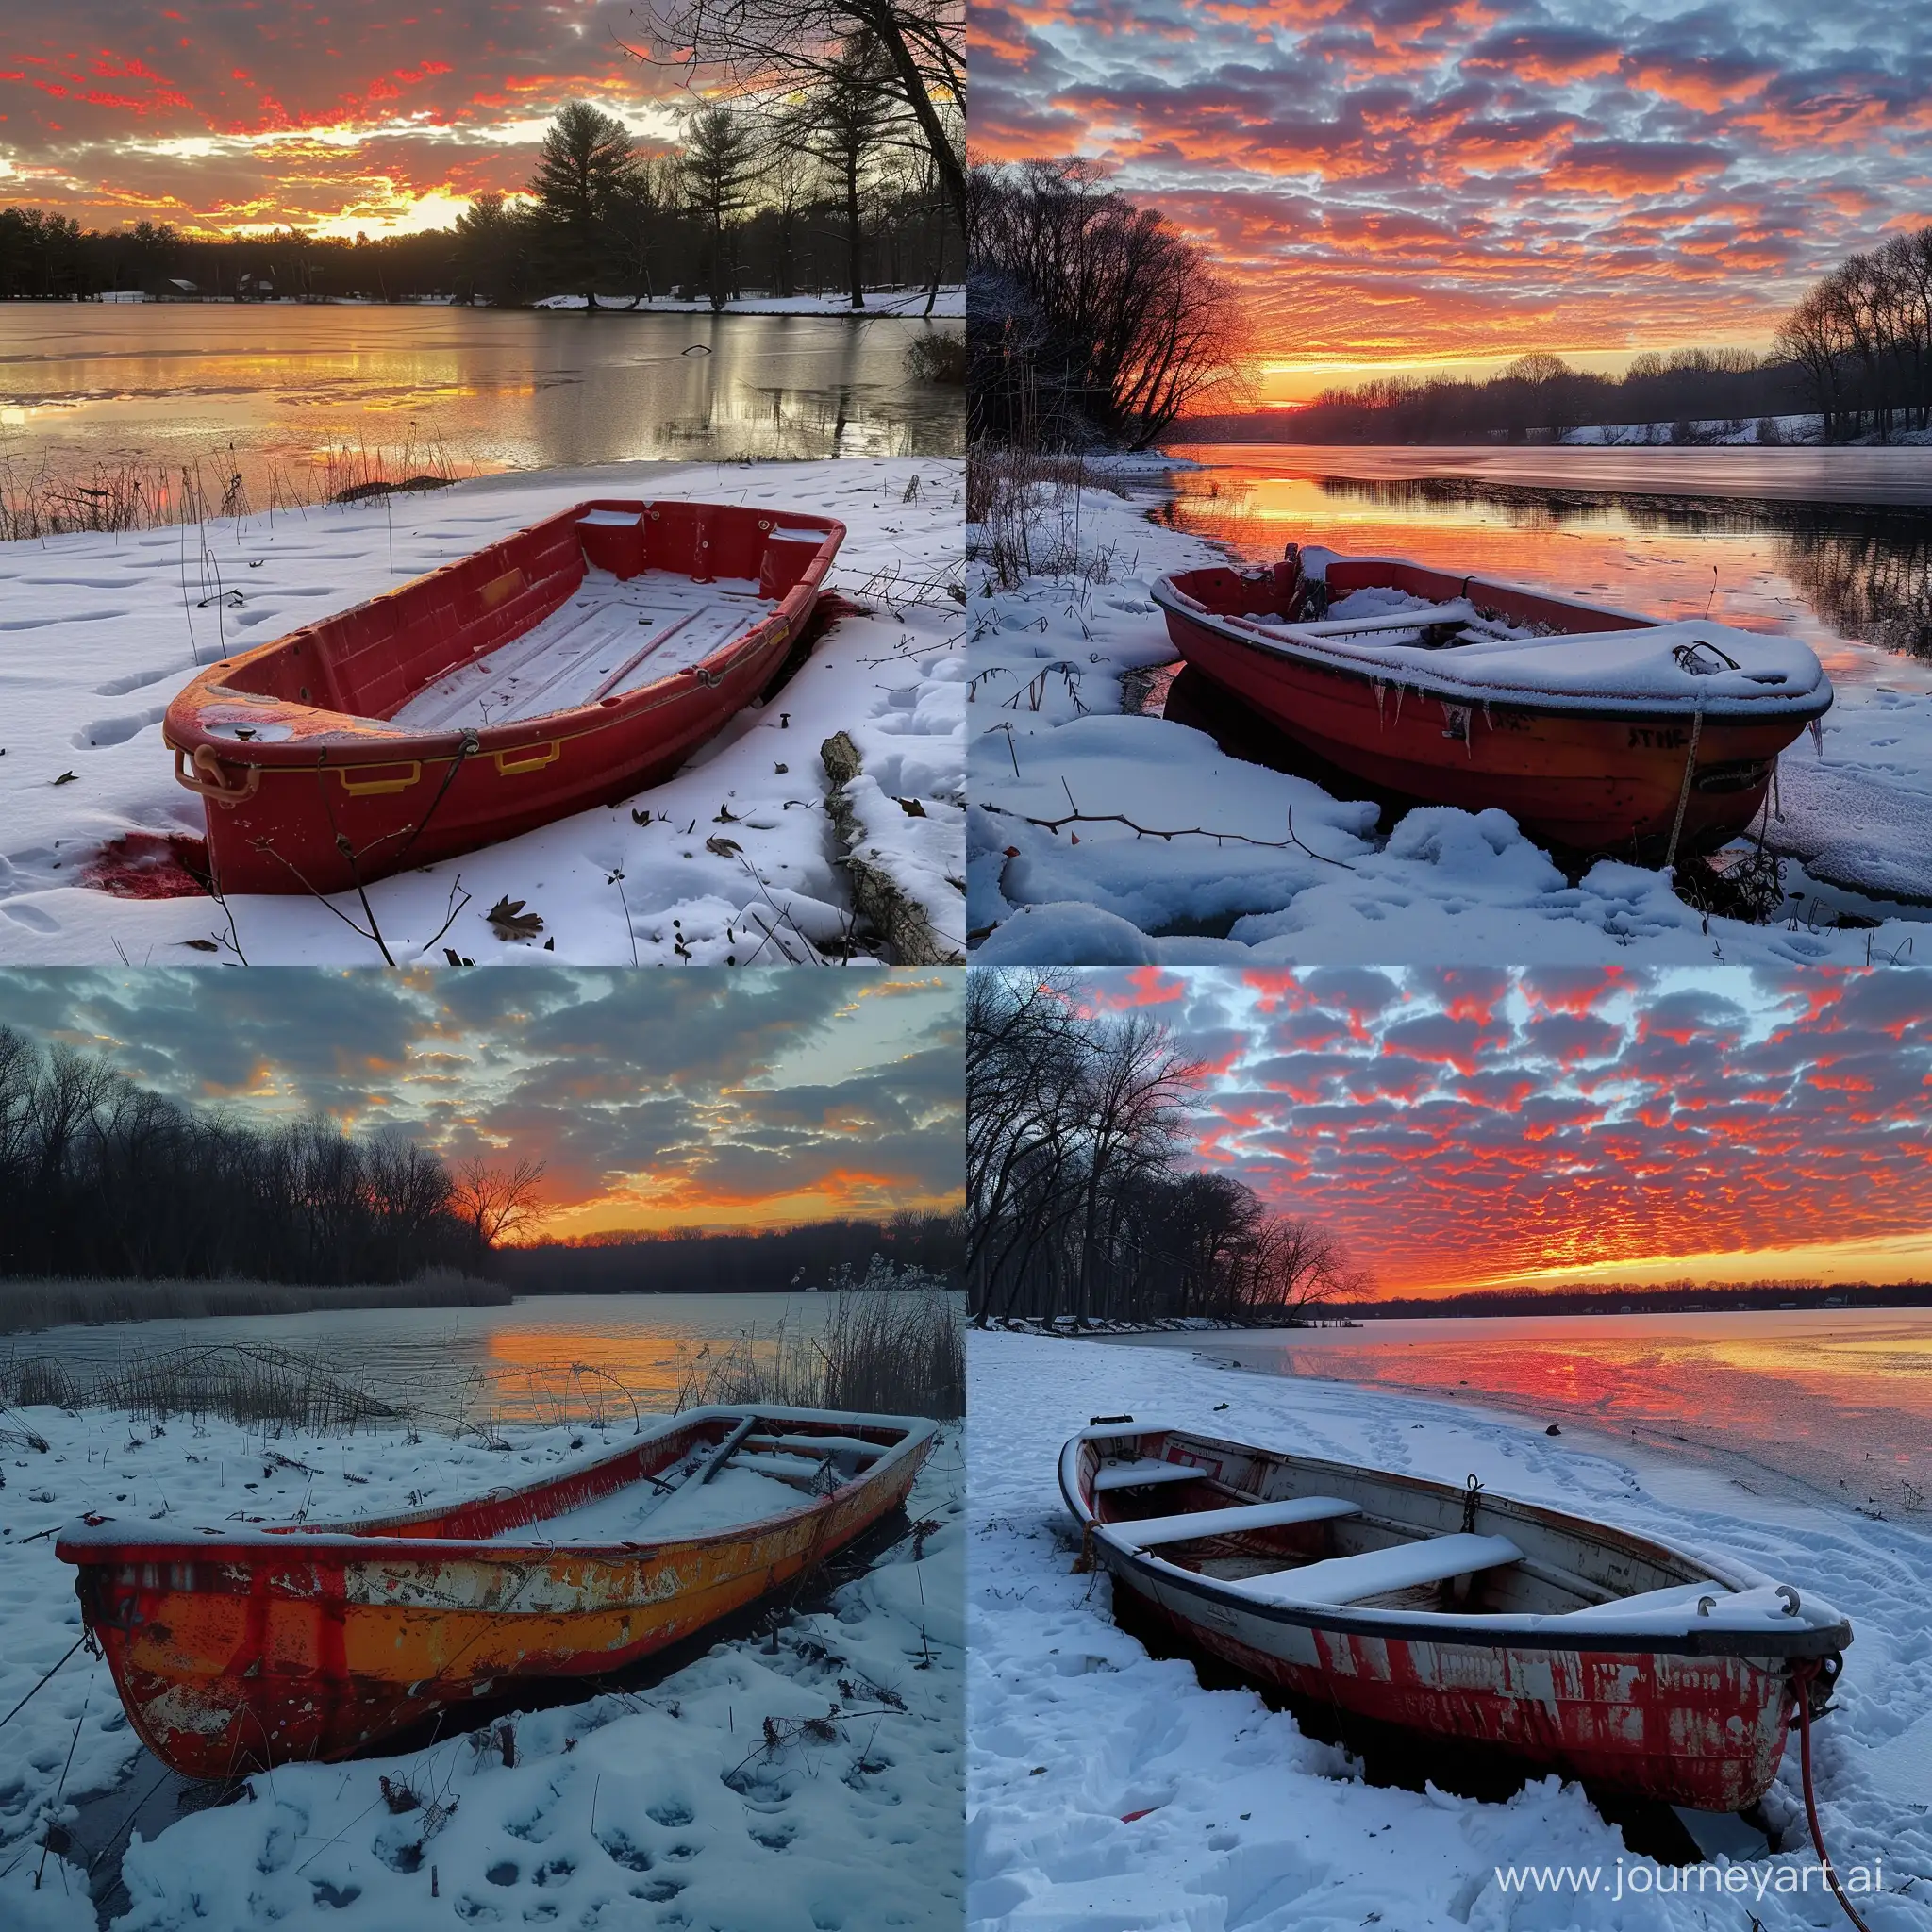 Serene-Snowy-Lake-Sunset-with-a-BloodRed-Sky-featuring-a-PVC-Boat